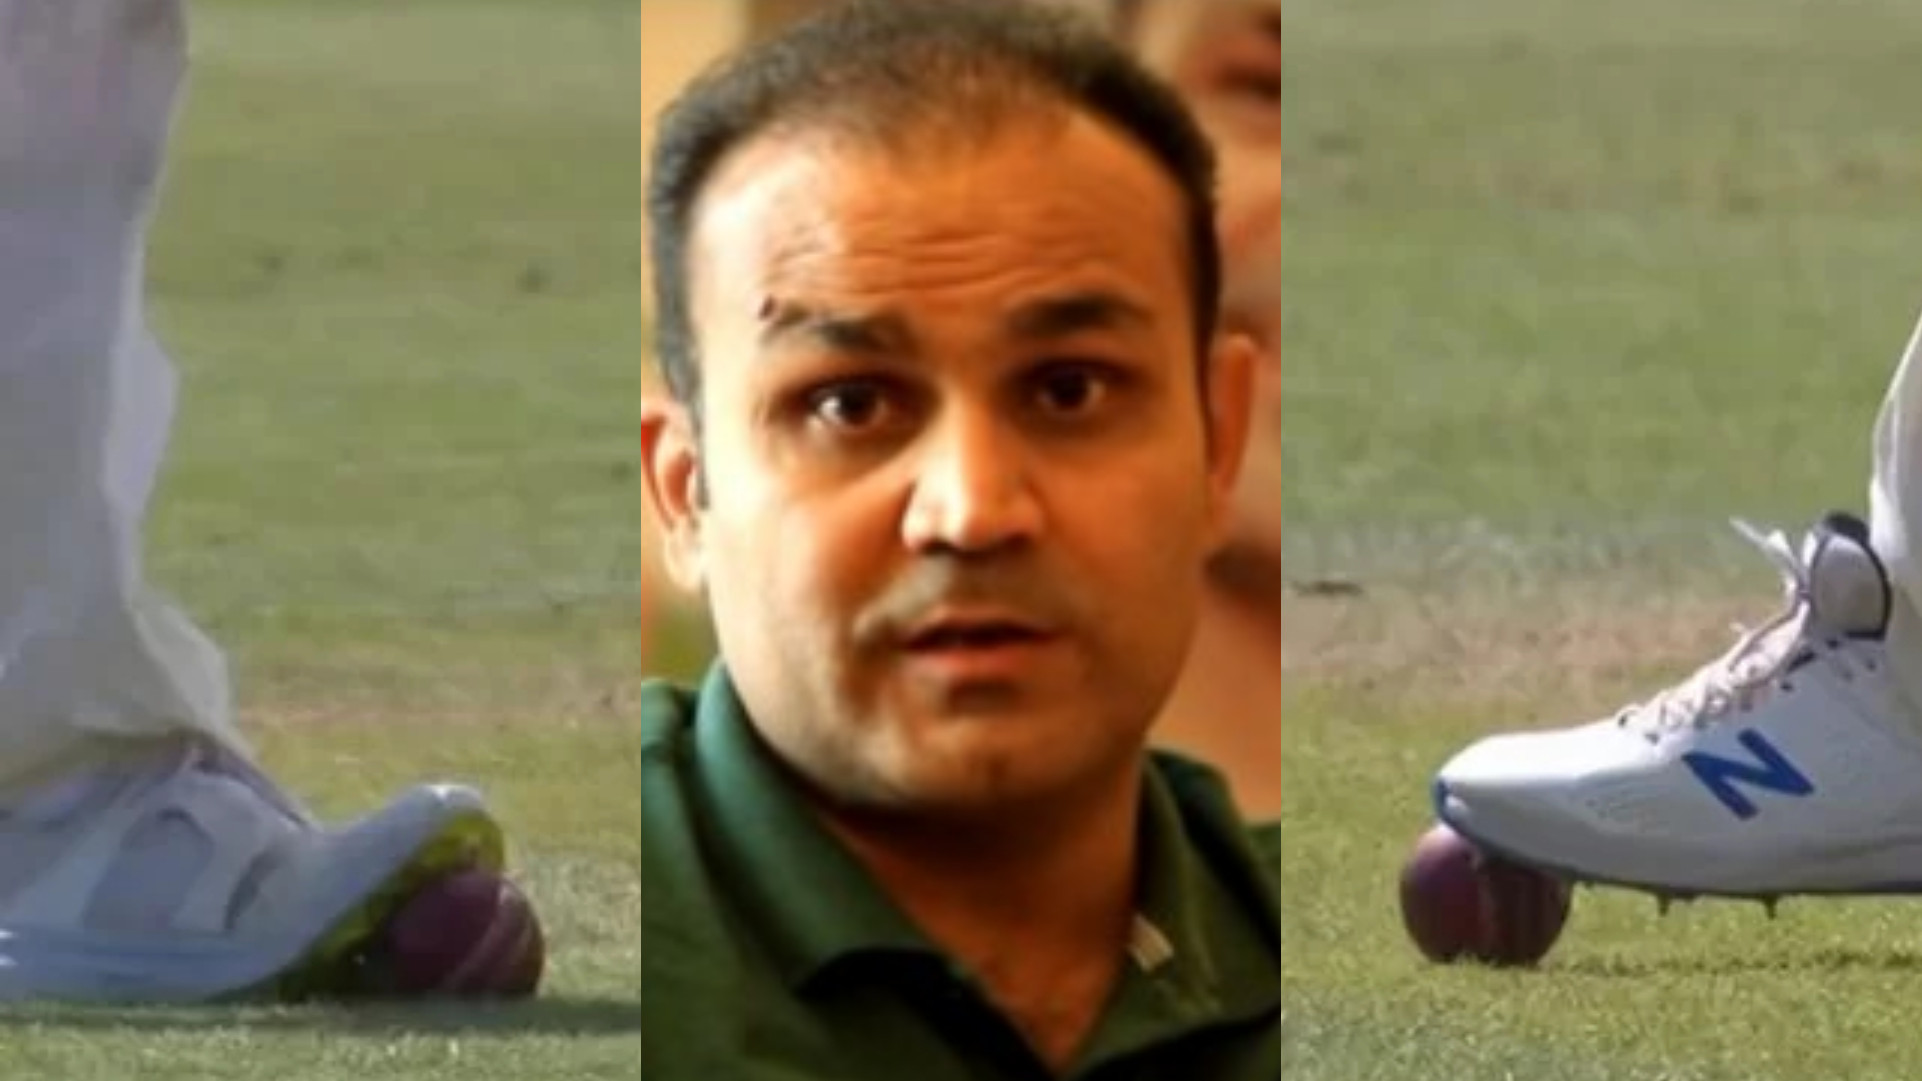 ENG v IND 2021: ‘What’s going on’- Sehwag asks after England players caught scuffing ball with spikes